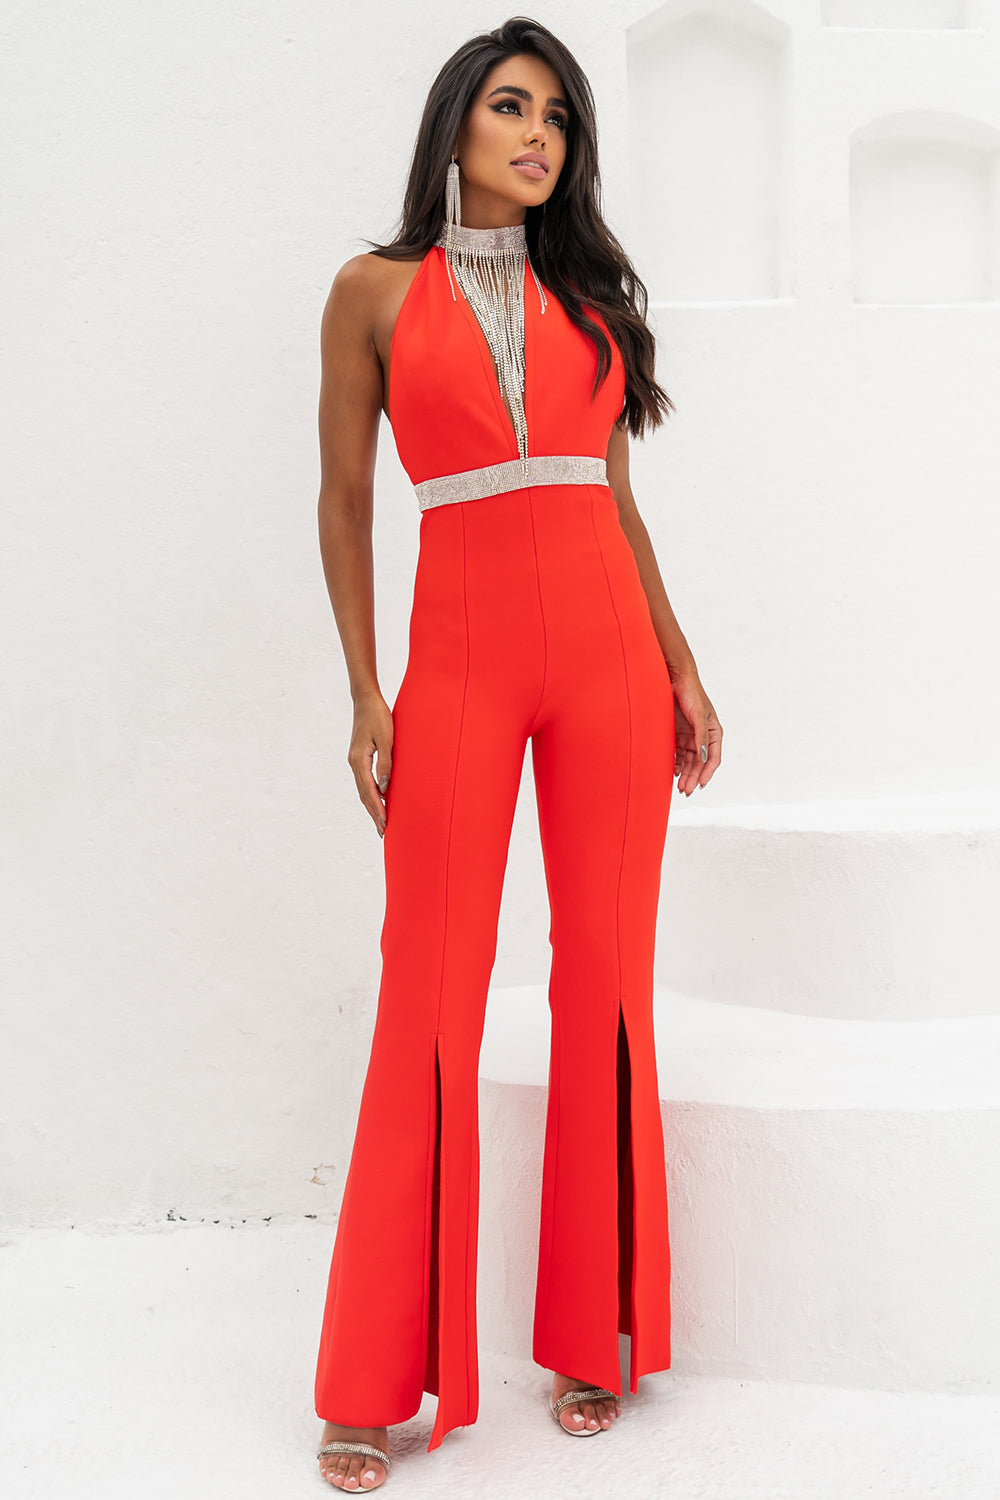 Sesidy-Cain High Neck Deep V Jumpsuit-Women's Clothing Online Store